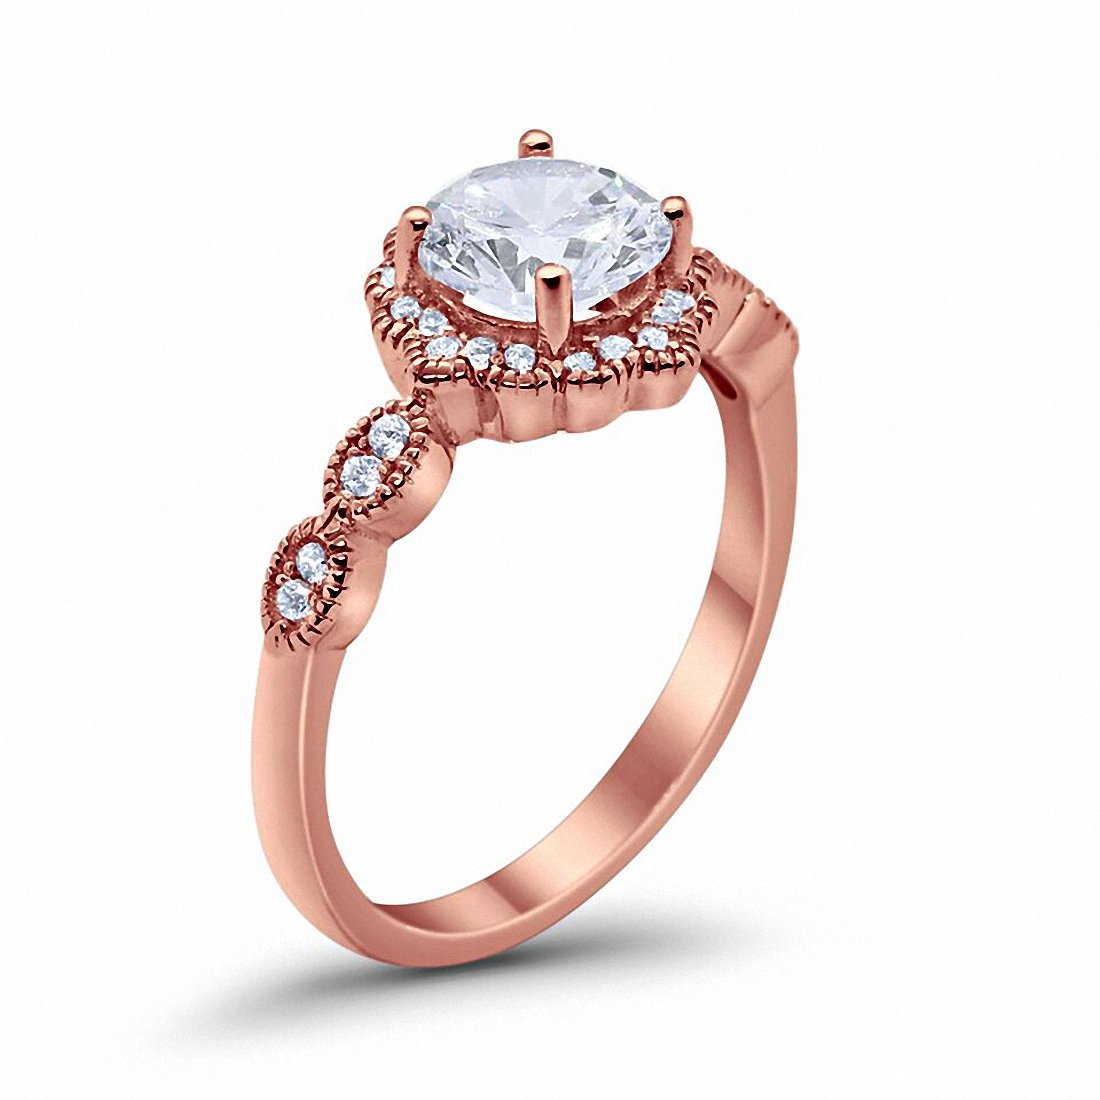 Floral Art Engagement Ring Round Rose Tone, Simulated CZ 925 Sterling Silver